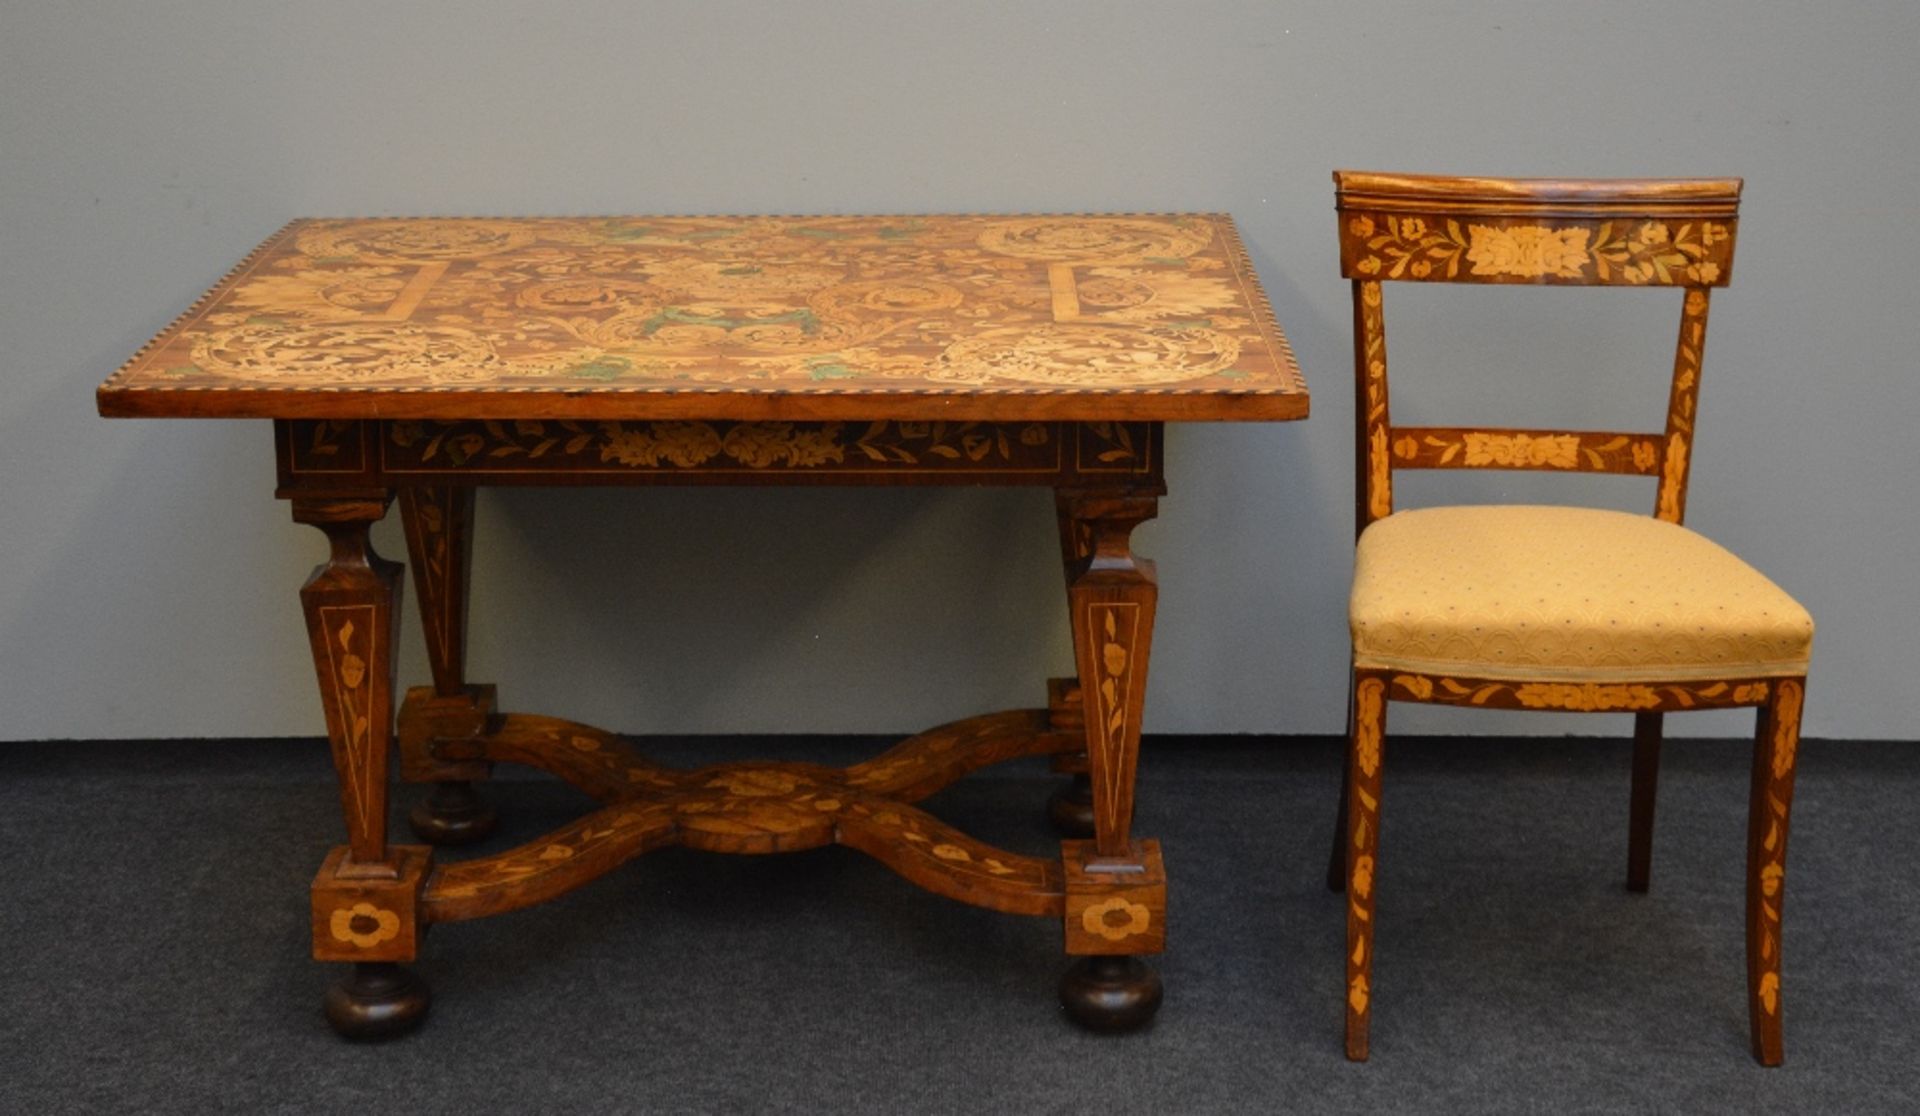 An exceptional LXIV-style Dutch writing desk with walnut veneer and marquetry, early 18thC; added